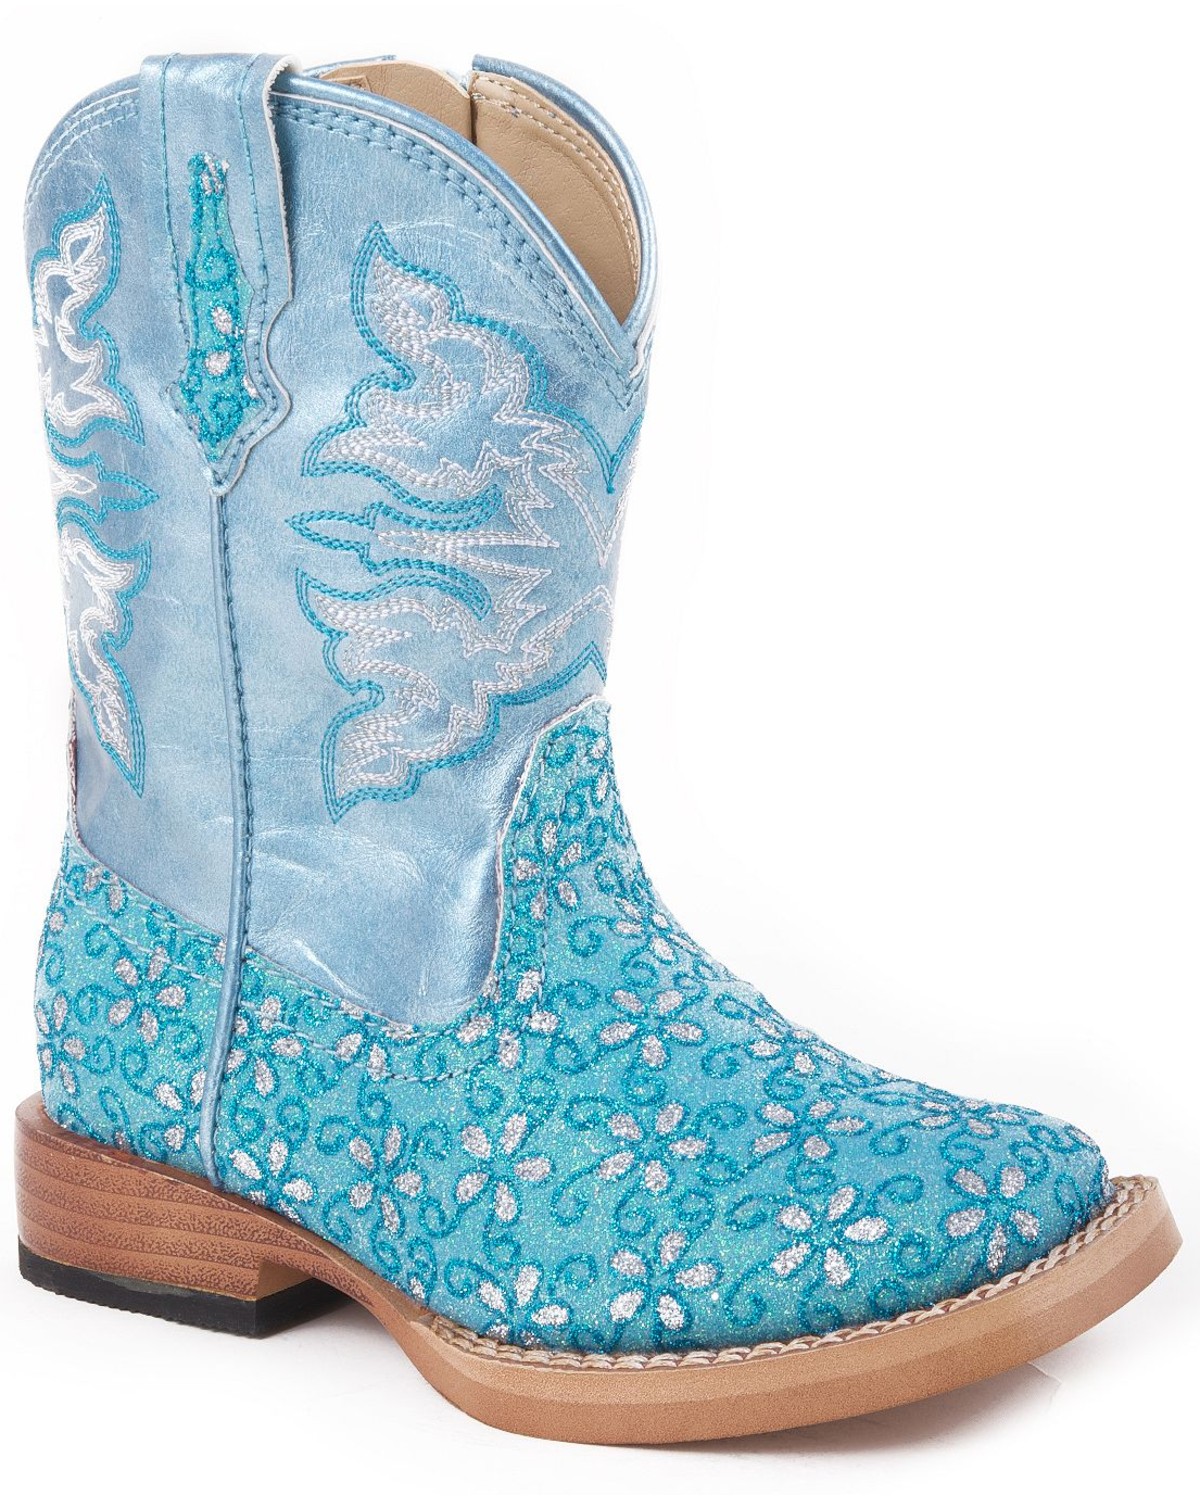 Roper Girls Kids Childs Bling Turquoise Blue Glitter Floral Cowboy Cowgirl Boots 